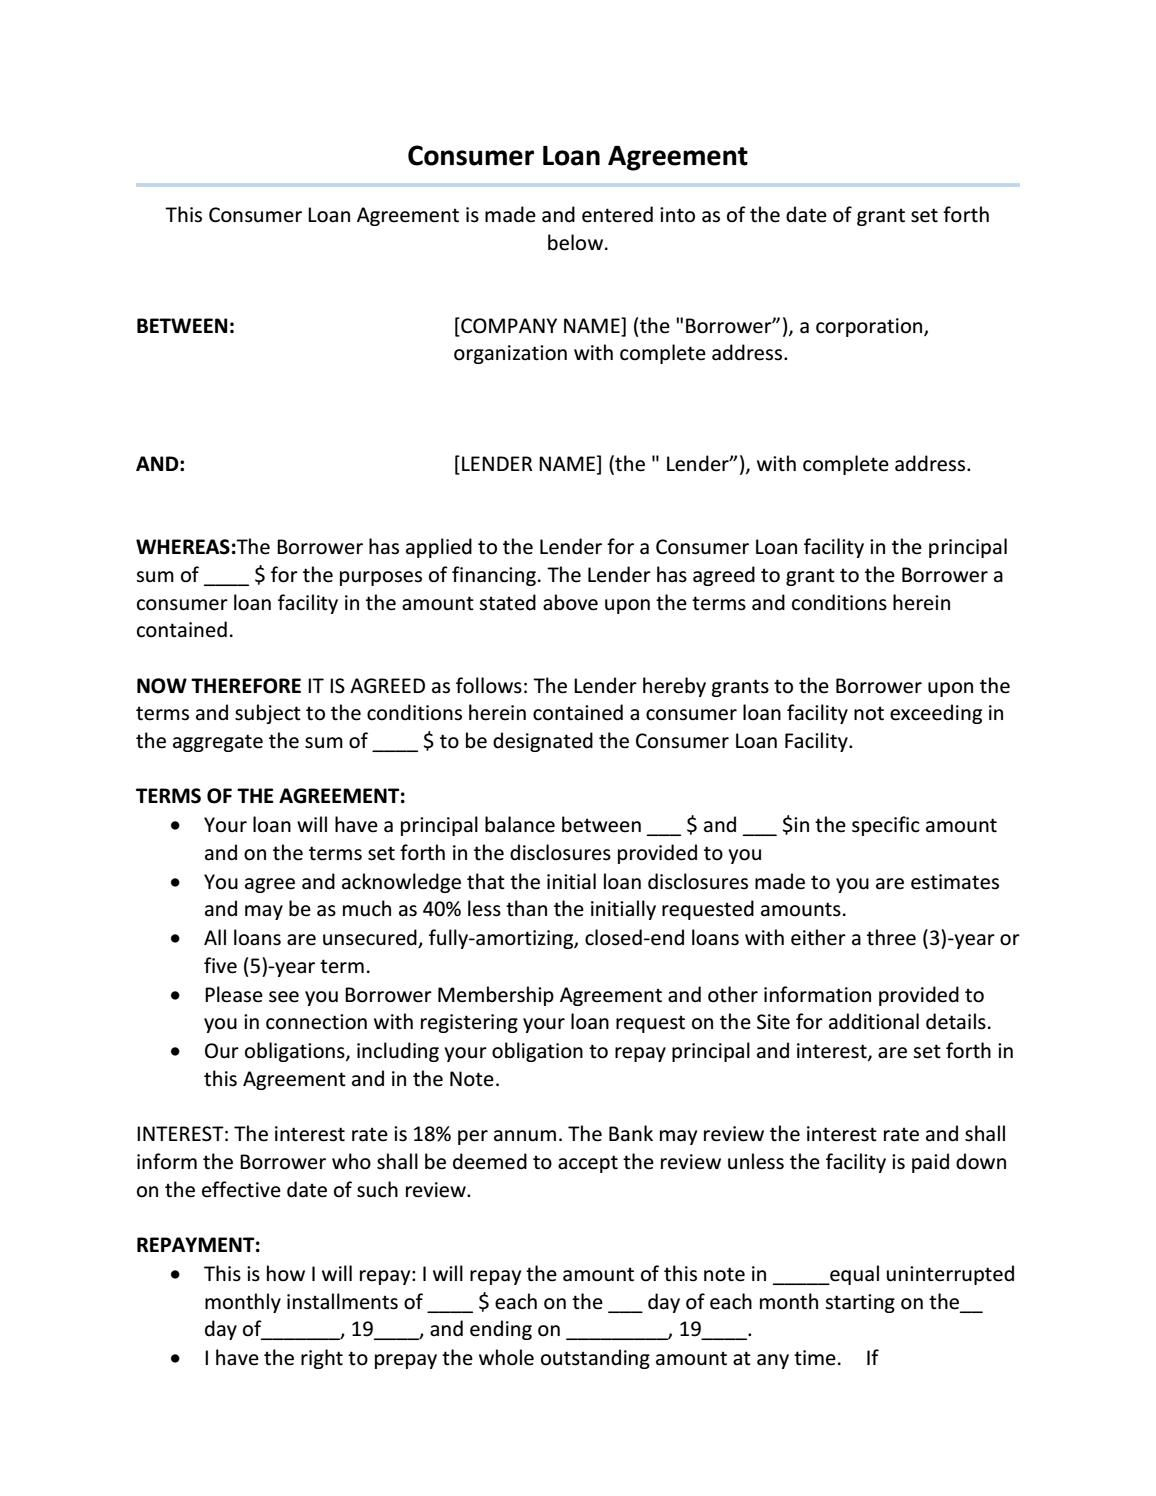 Personal Loan Repayment Letter Template - Consumer Loan Agreement Sample